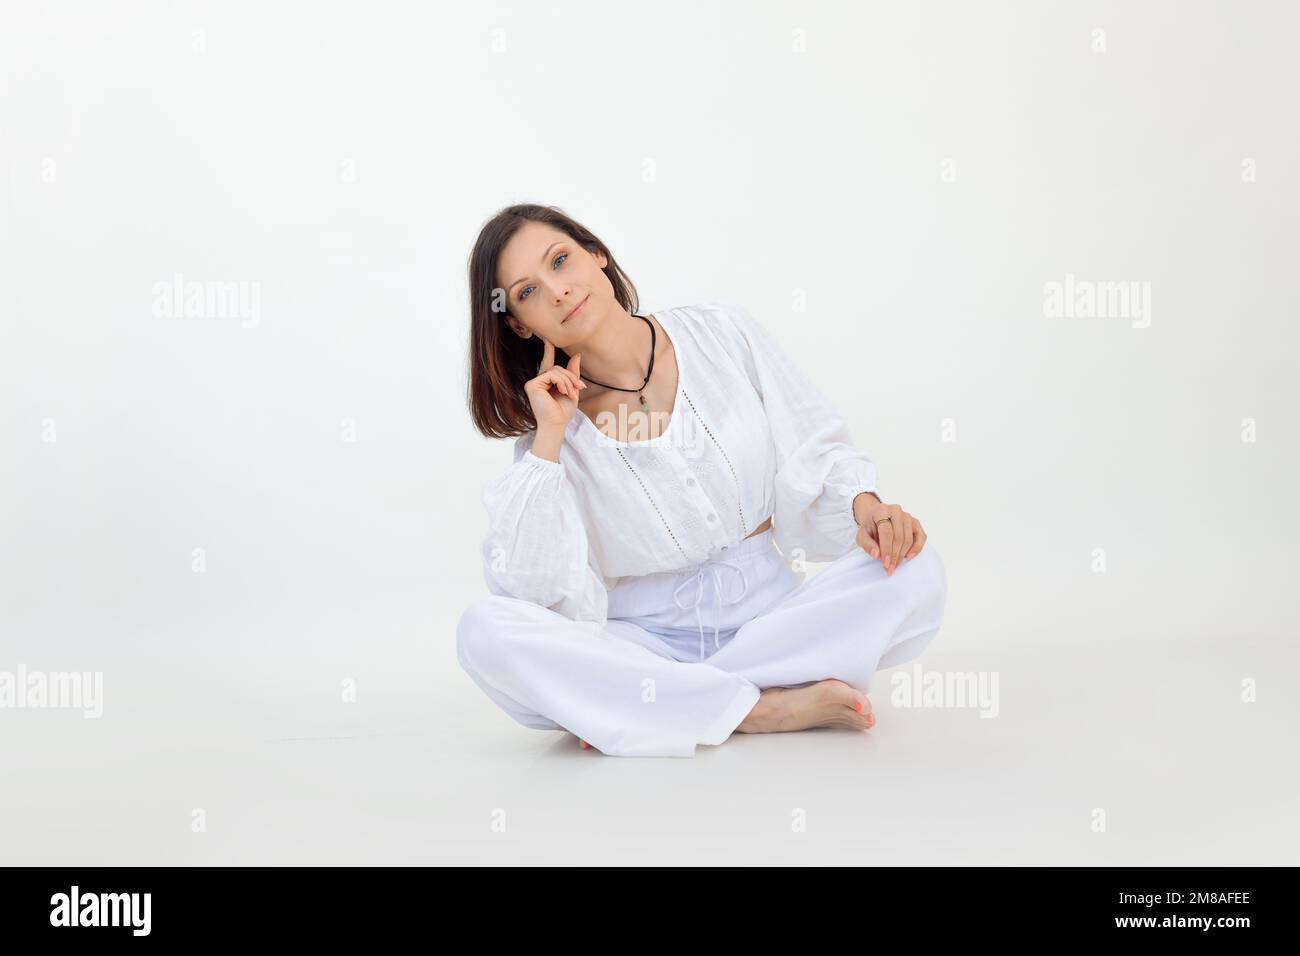 Portrait of young woman with short dark hair wearing white loose blouse, trousers, sitting on floor with crossed legs. Stock Photo